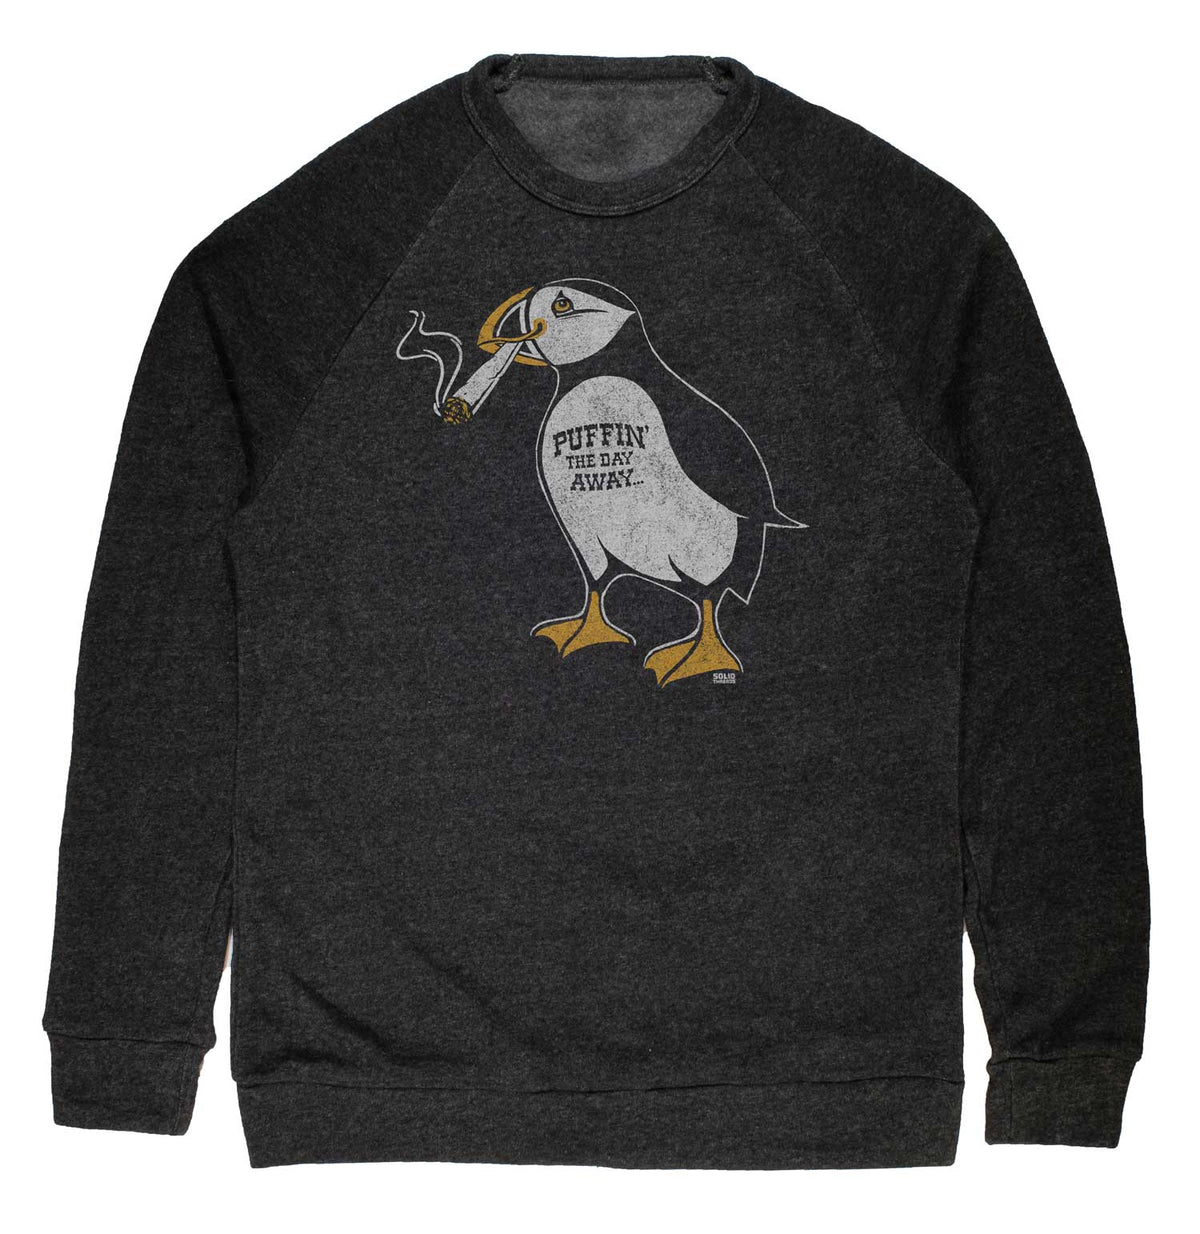 Unisex Puffin the Day Away Vintage Inspired Fleece | Funny Marijuana Graphic Pullover | Solid Threads